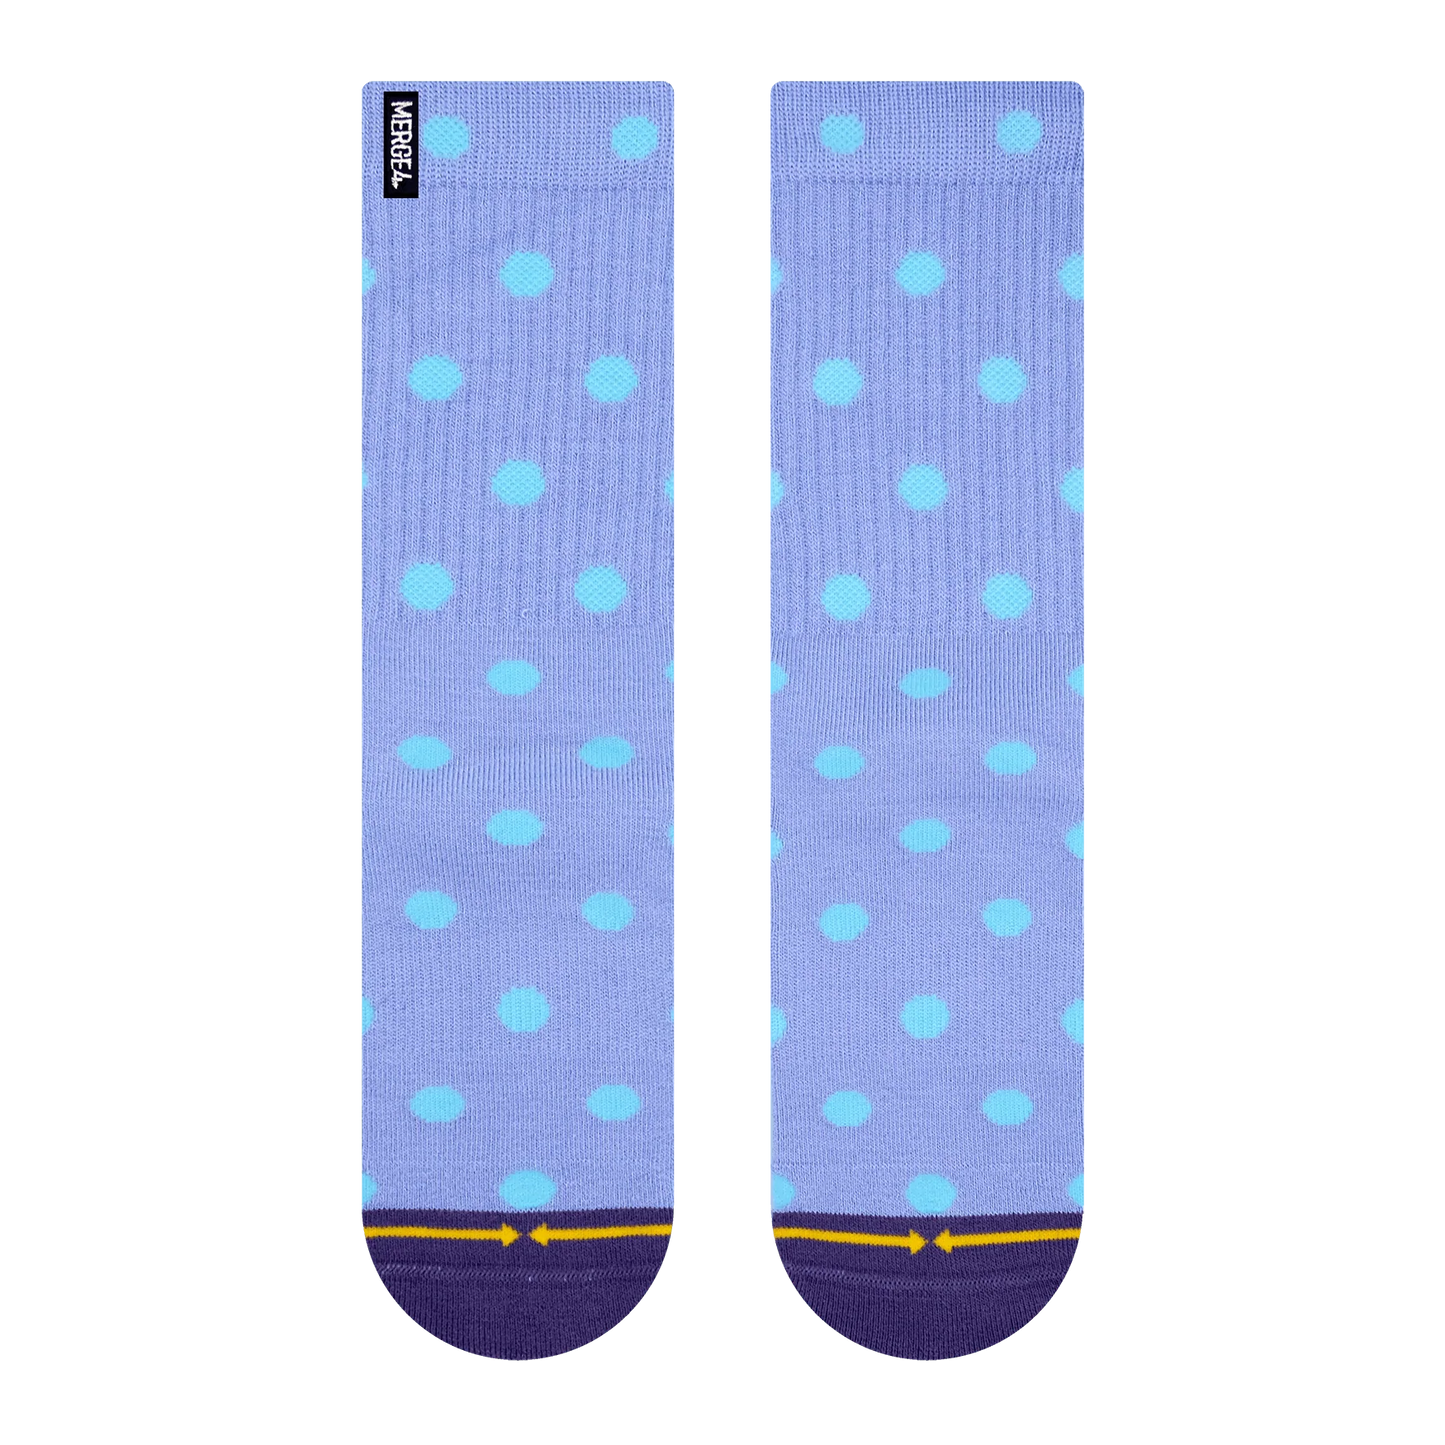 SPIDEY BAMBOO PERIWINKLE POLKA DOTS